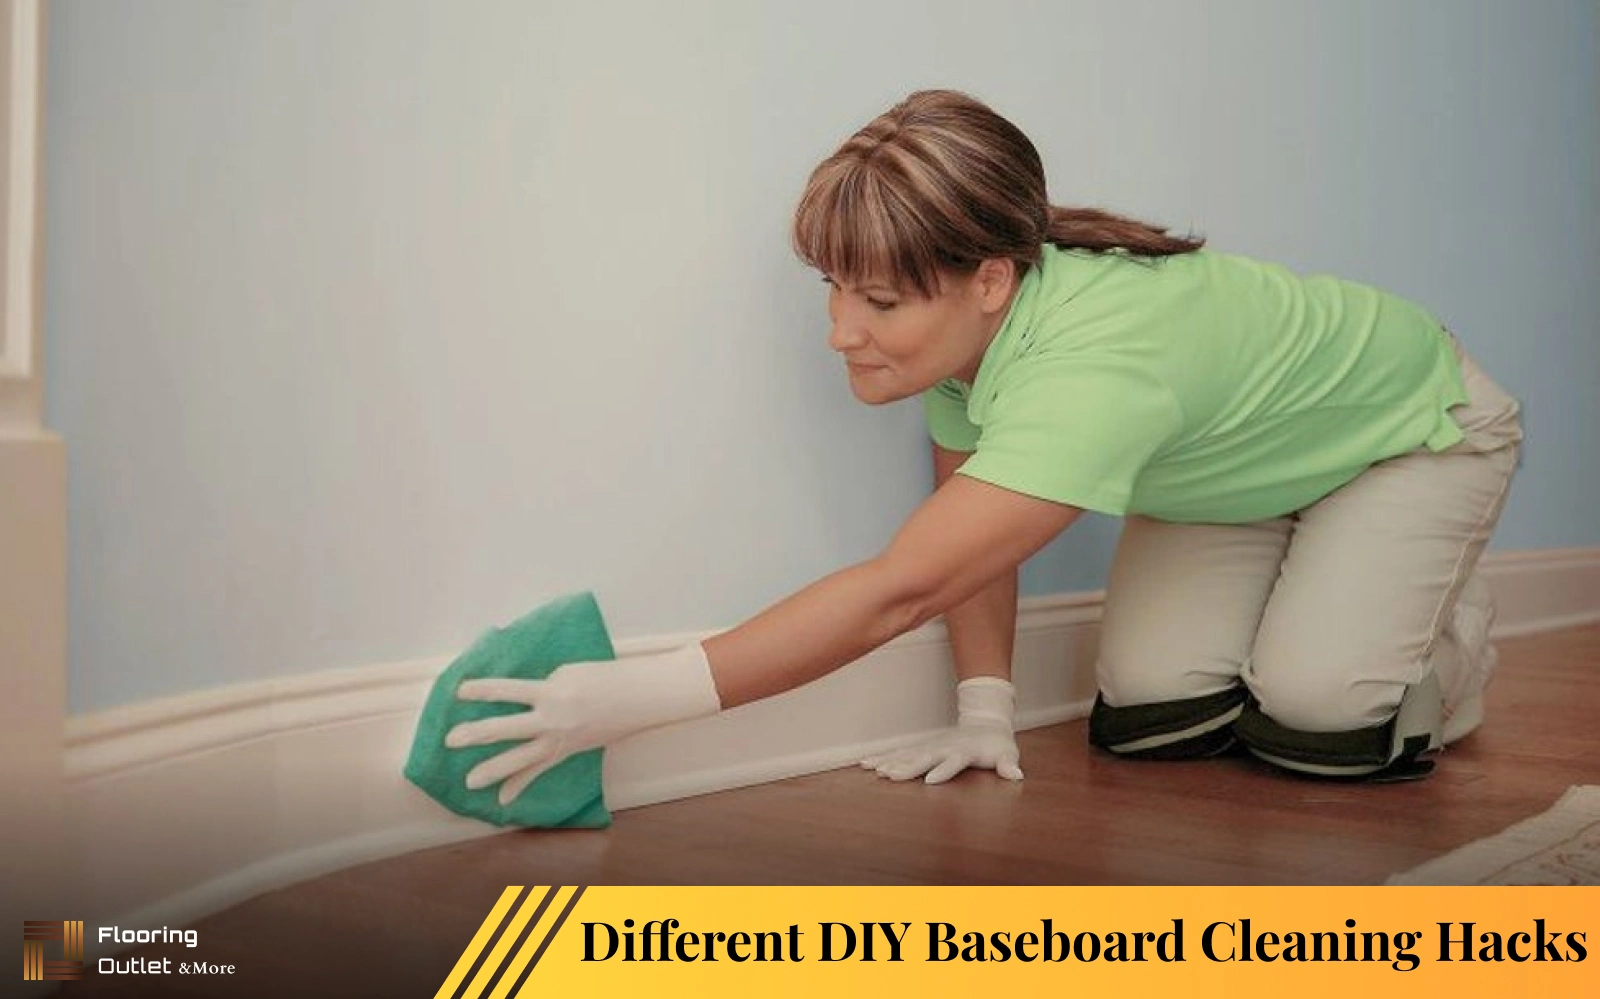 Different DIY Baseboard Cleaning Hacks